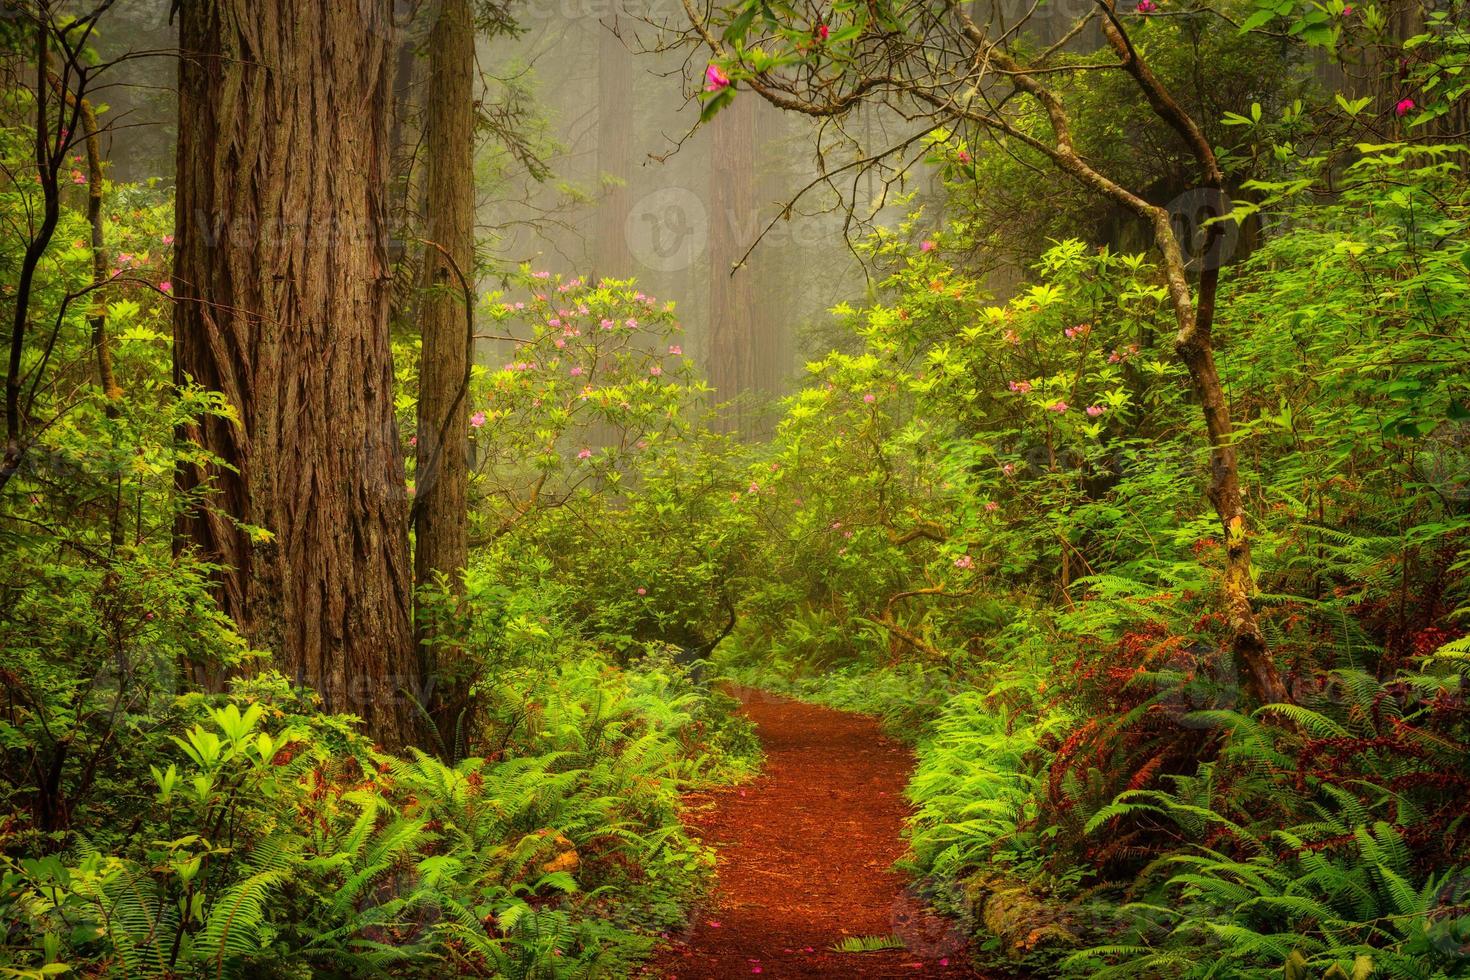 Redwoods and rhododendrons along the Damnation Creek Trail in Del Norte Coast Redwoods State Park, California, USA photo